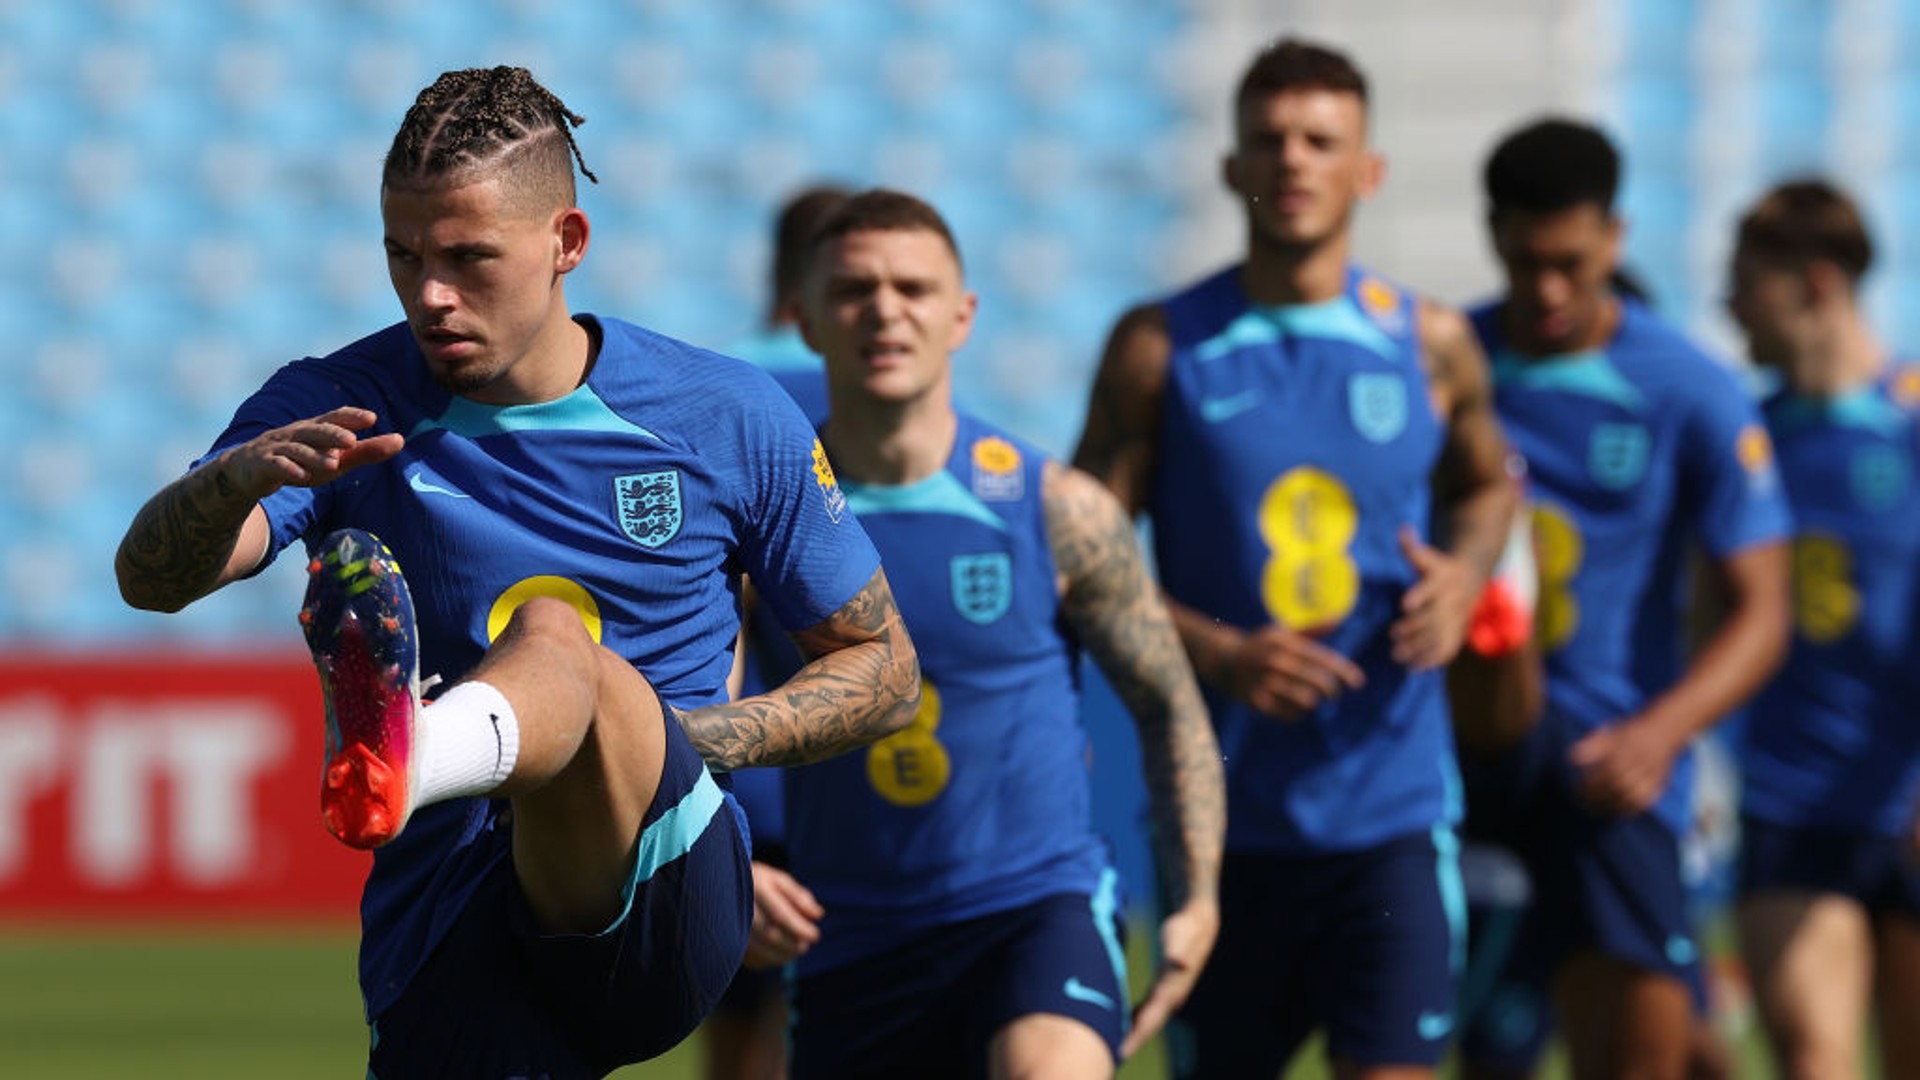 RETURN TICKET: Kalvin Phillips recovered from injury to take his place in England's squad